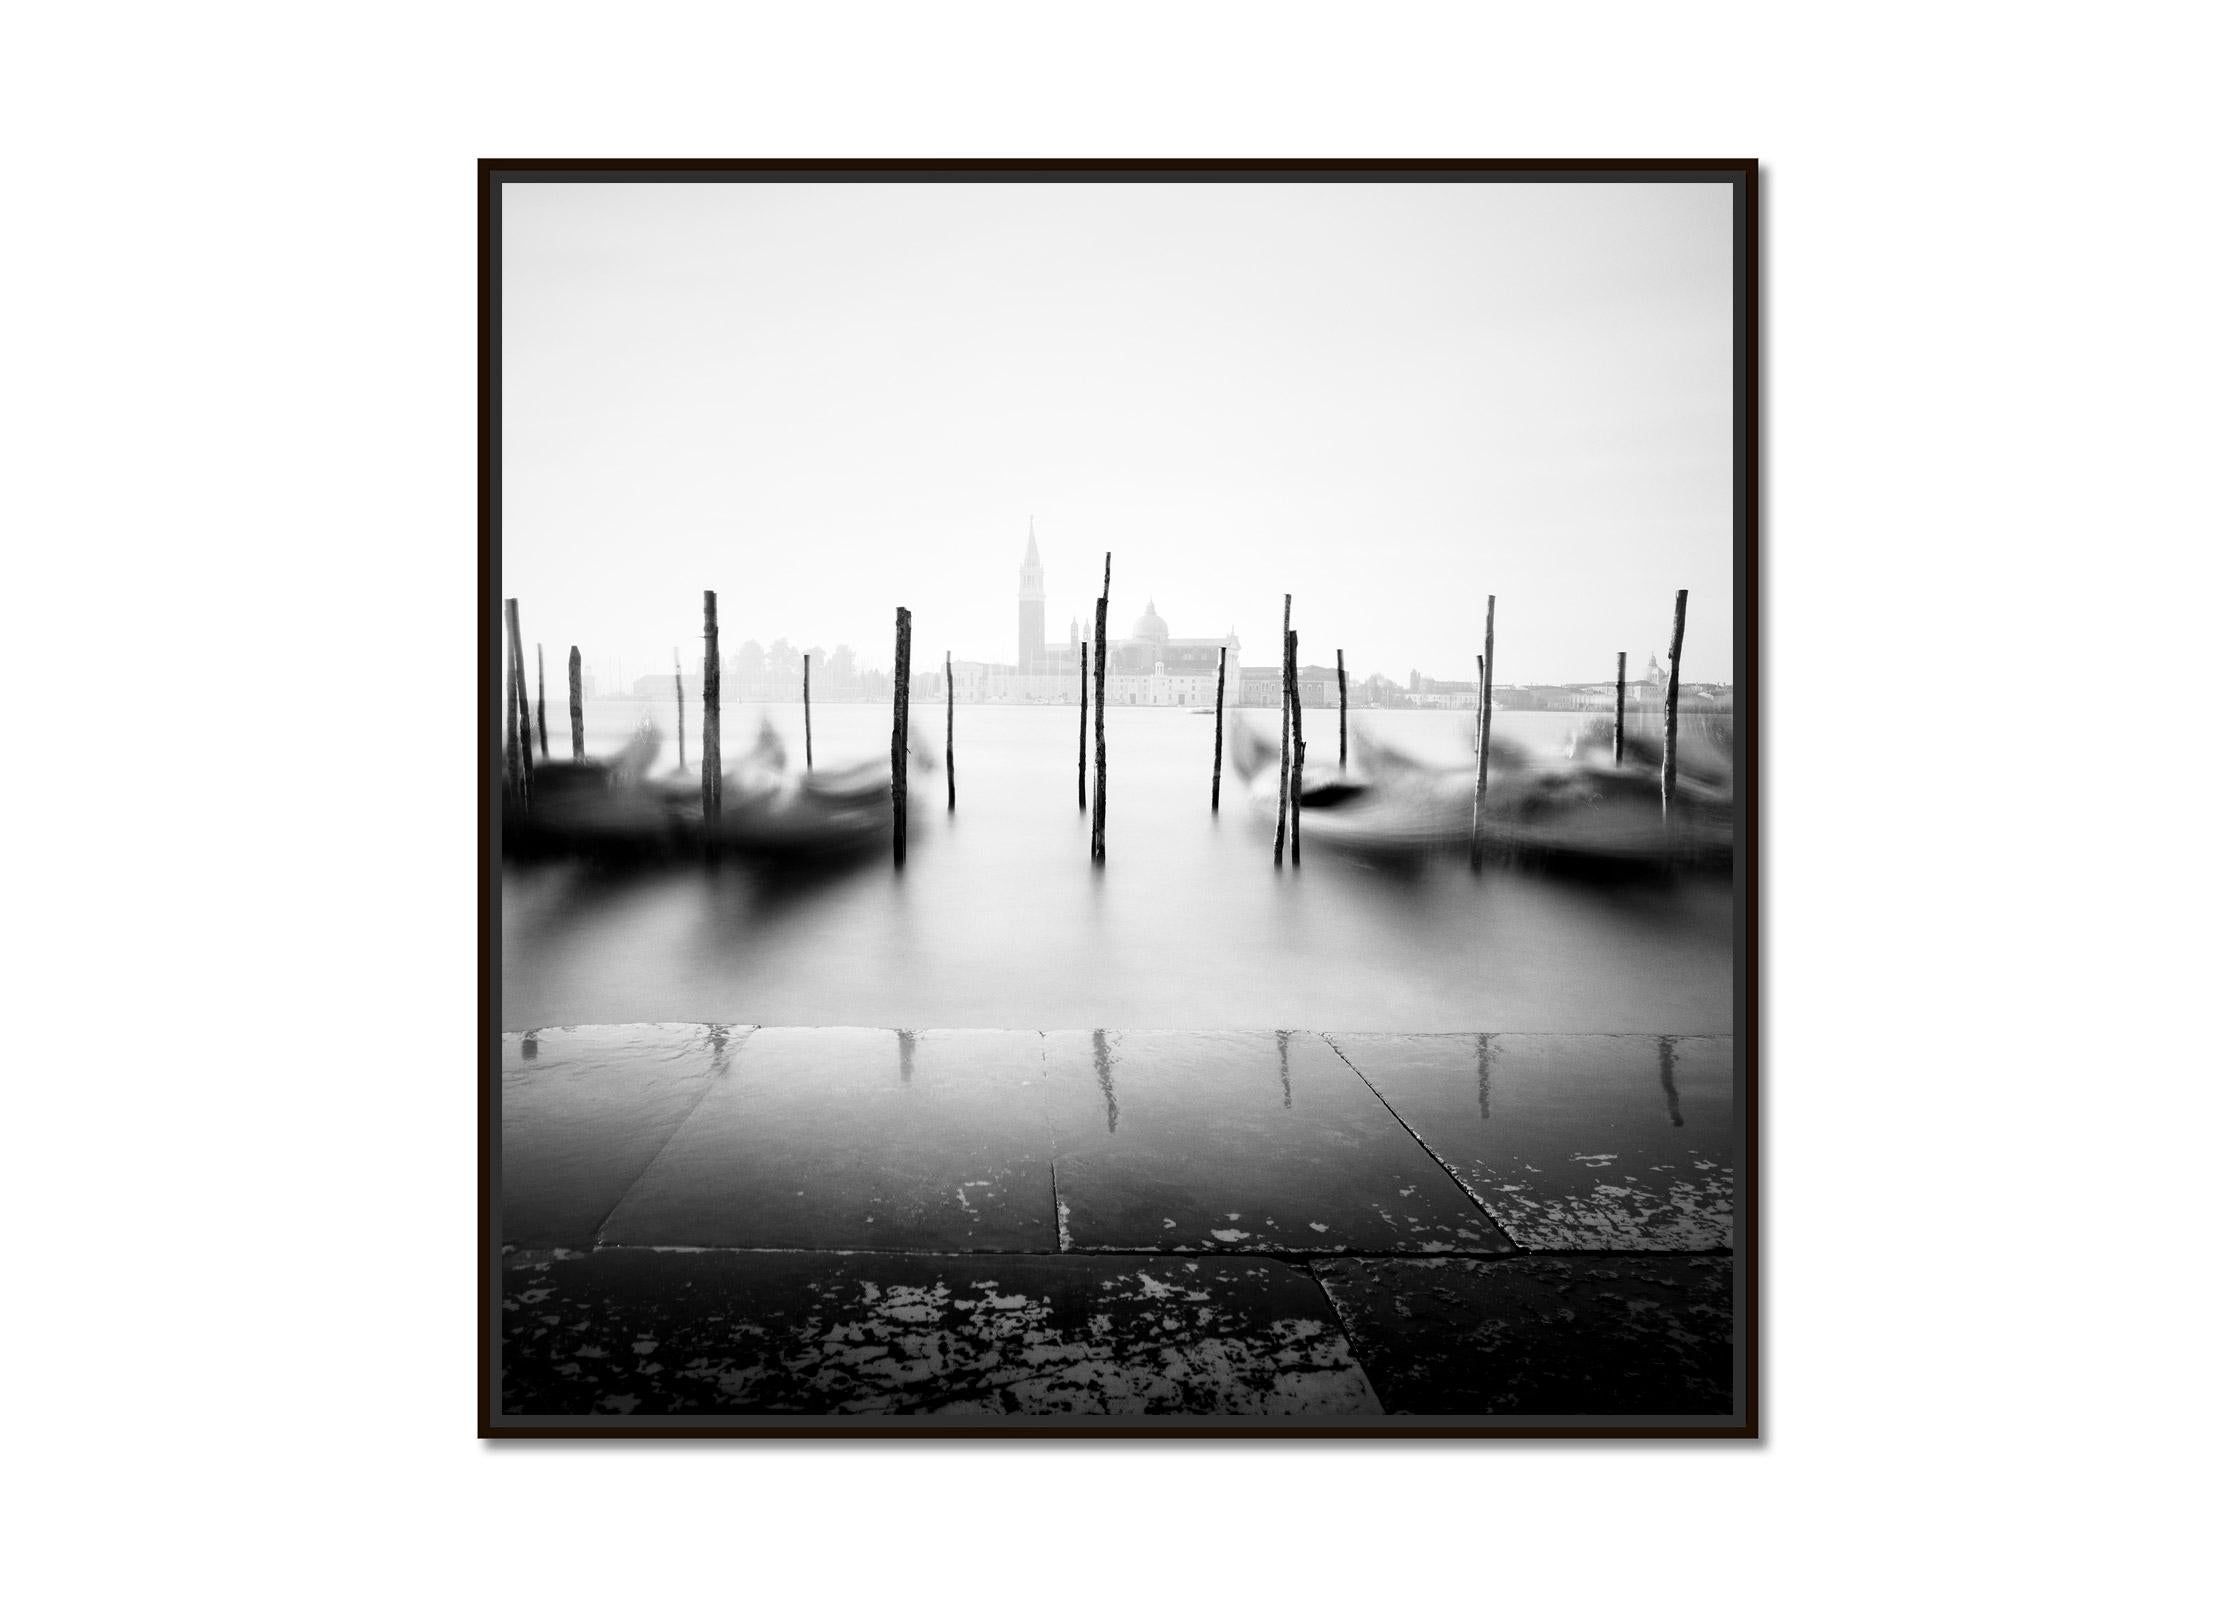 Free Space, Basilica, Gondola, Venice, black and white photography, landscape - Photograph by Gerald Berghammer